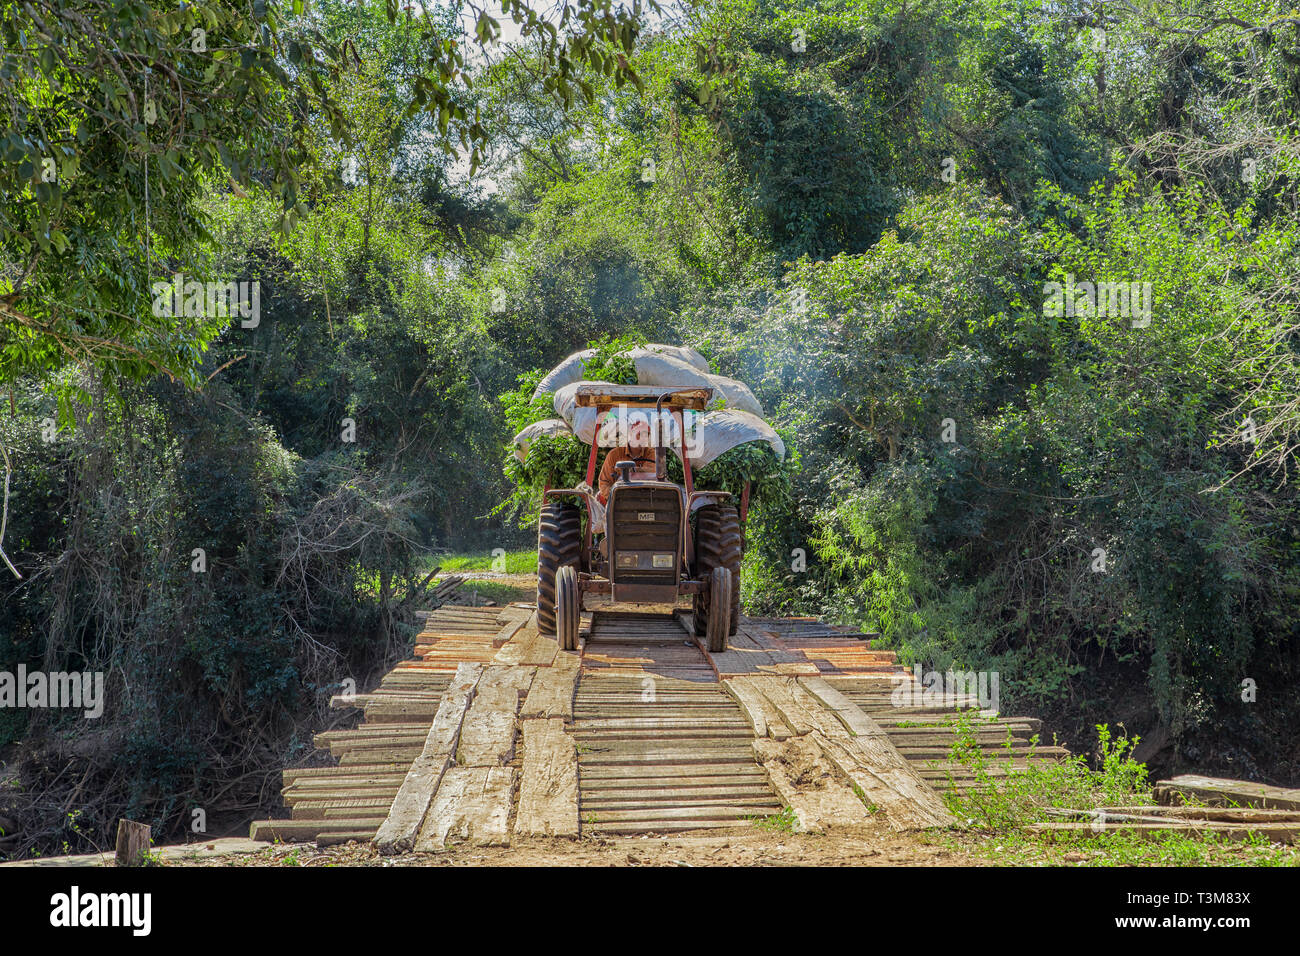 Colonia Independencia, Paraguay - June 20, 2018: Farmer with tractor in Paraguay drives over a winding wooden bridge. Stock Photo